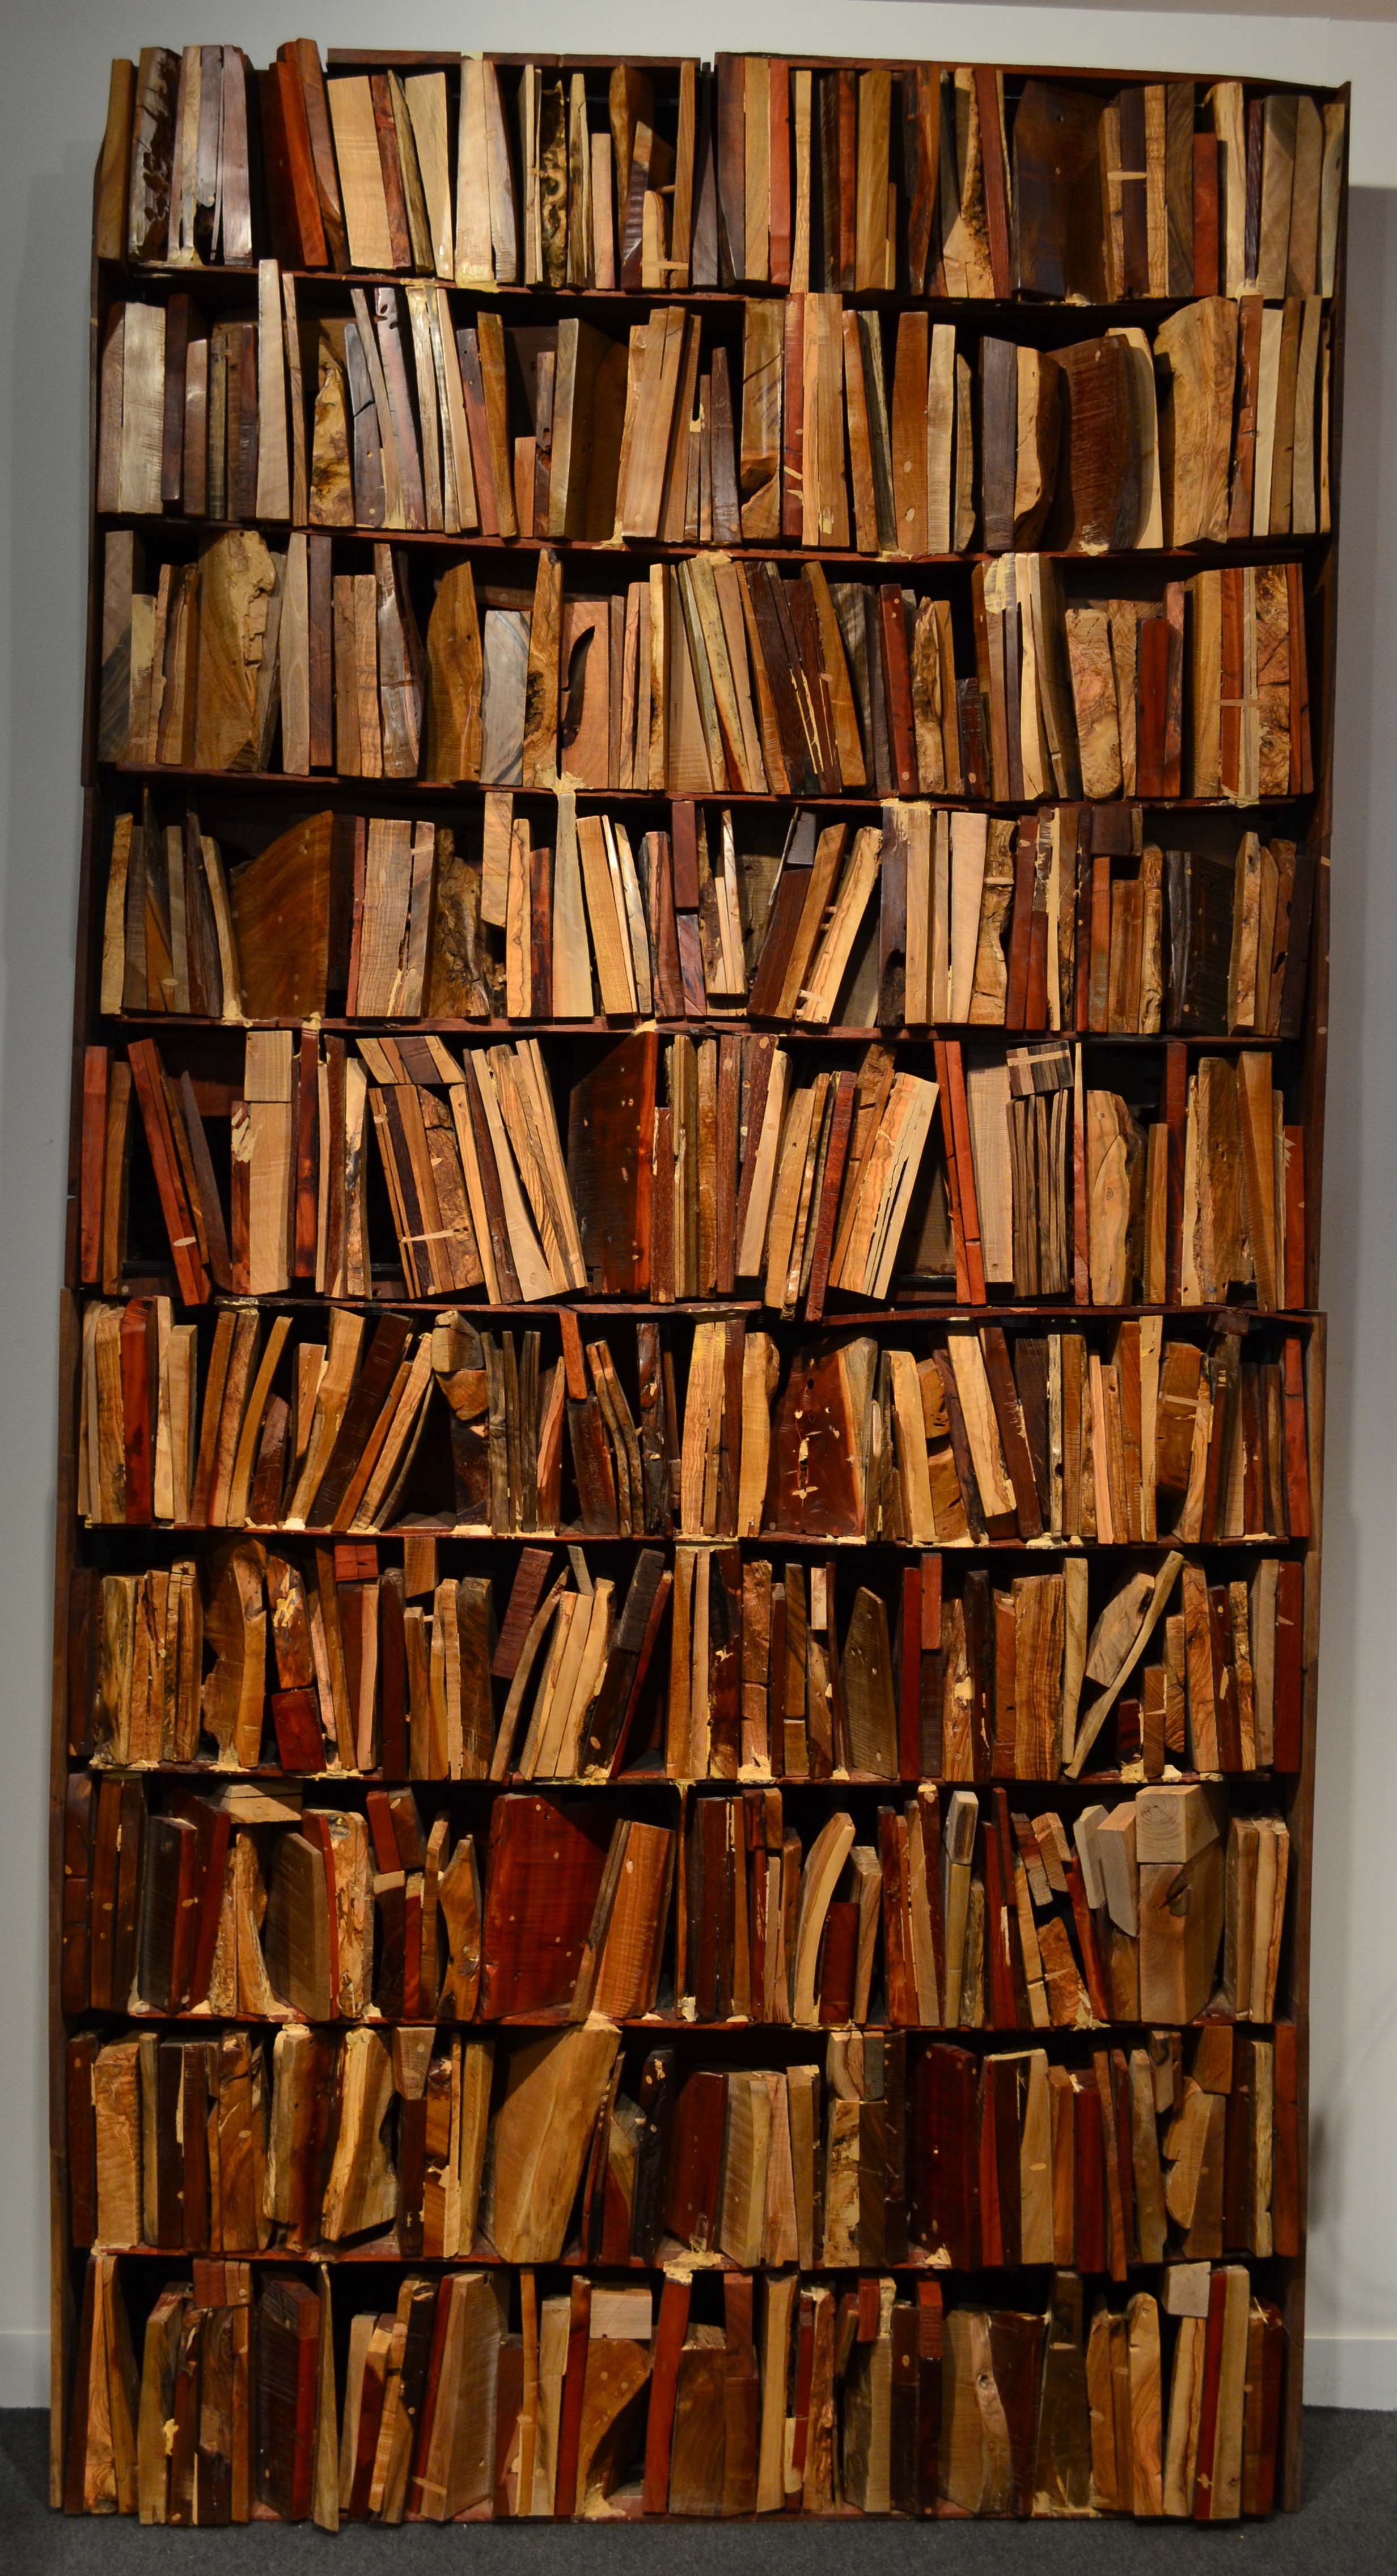 Bookcase by Manolo Valdes